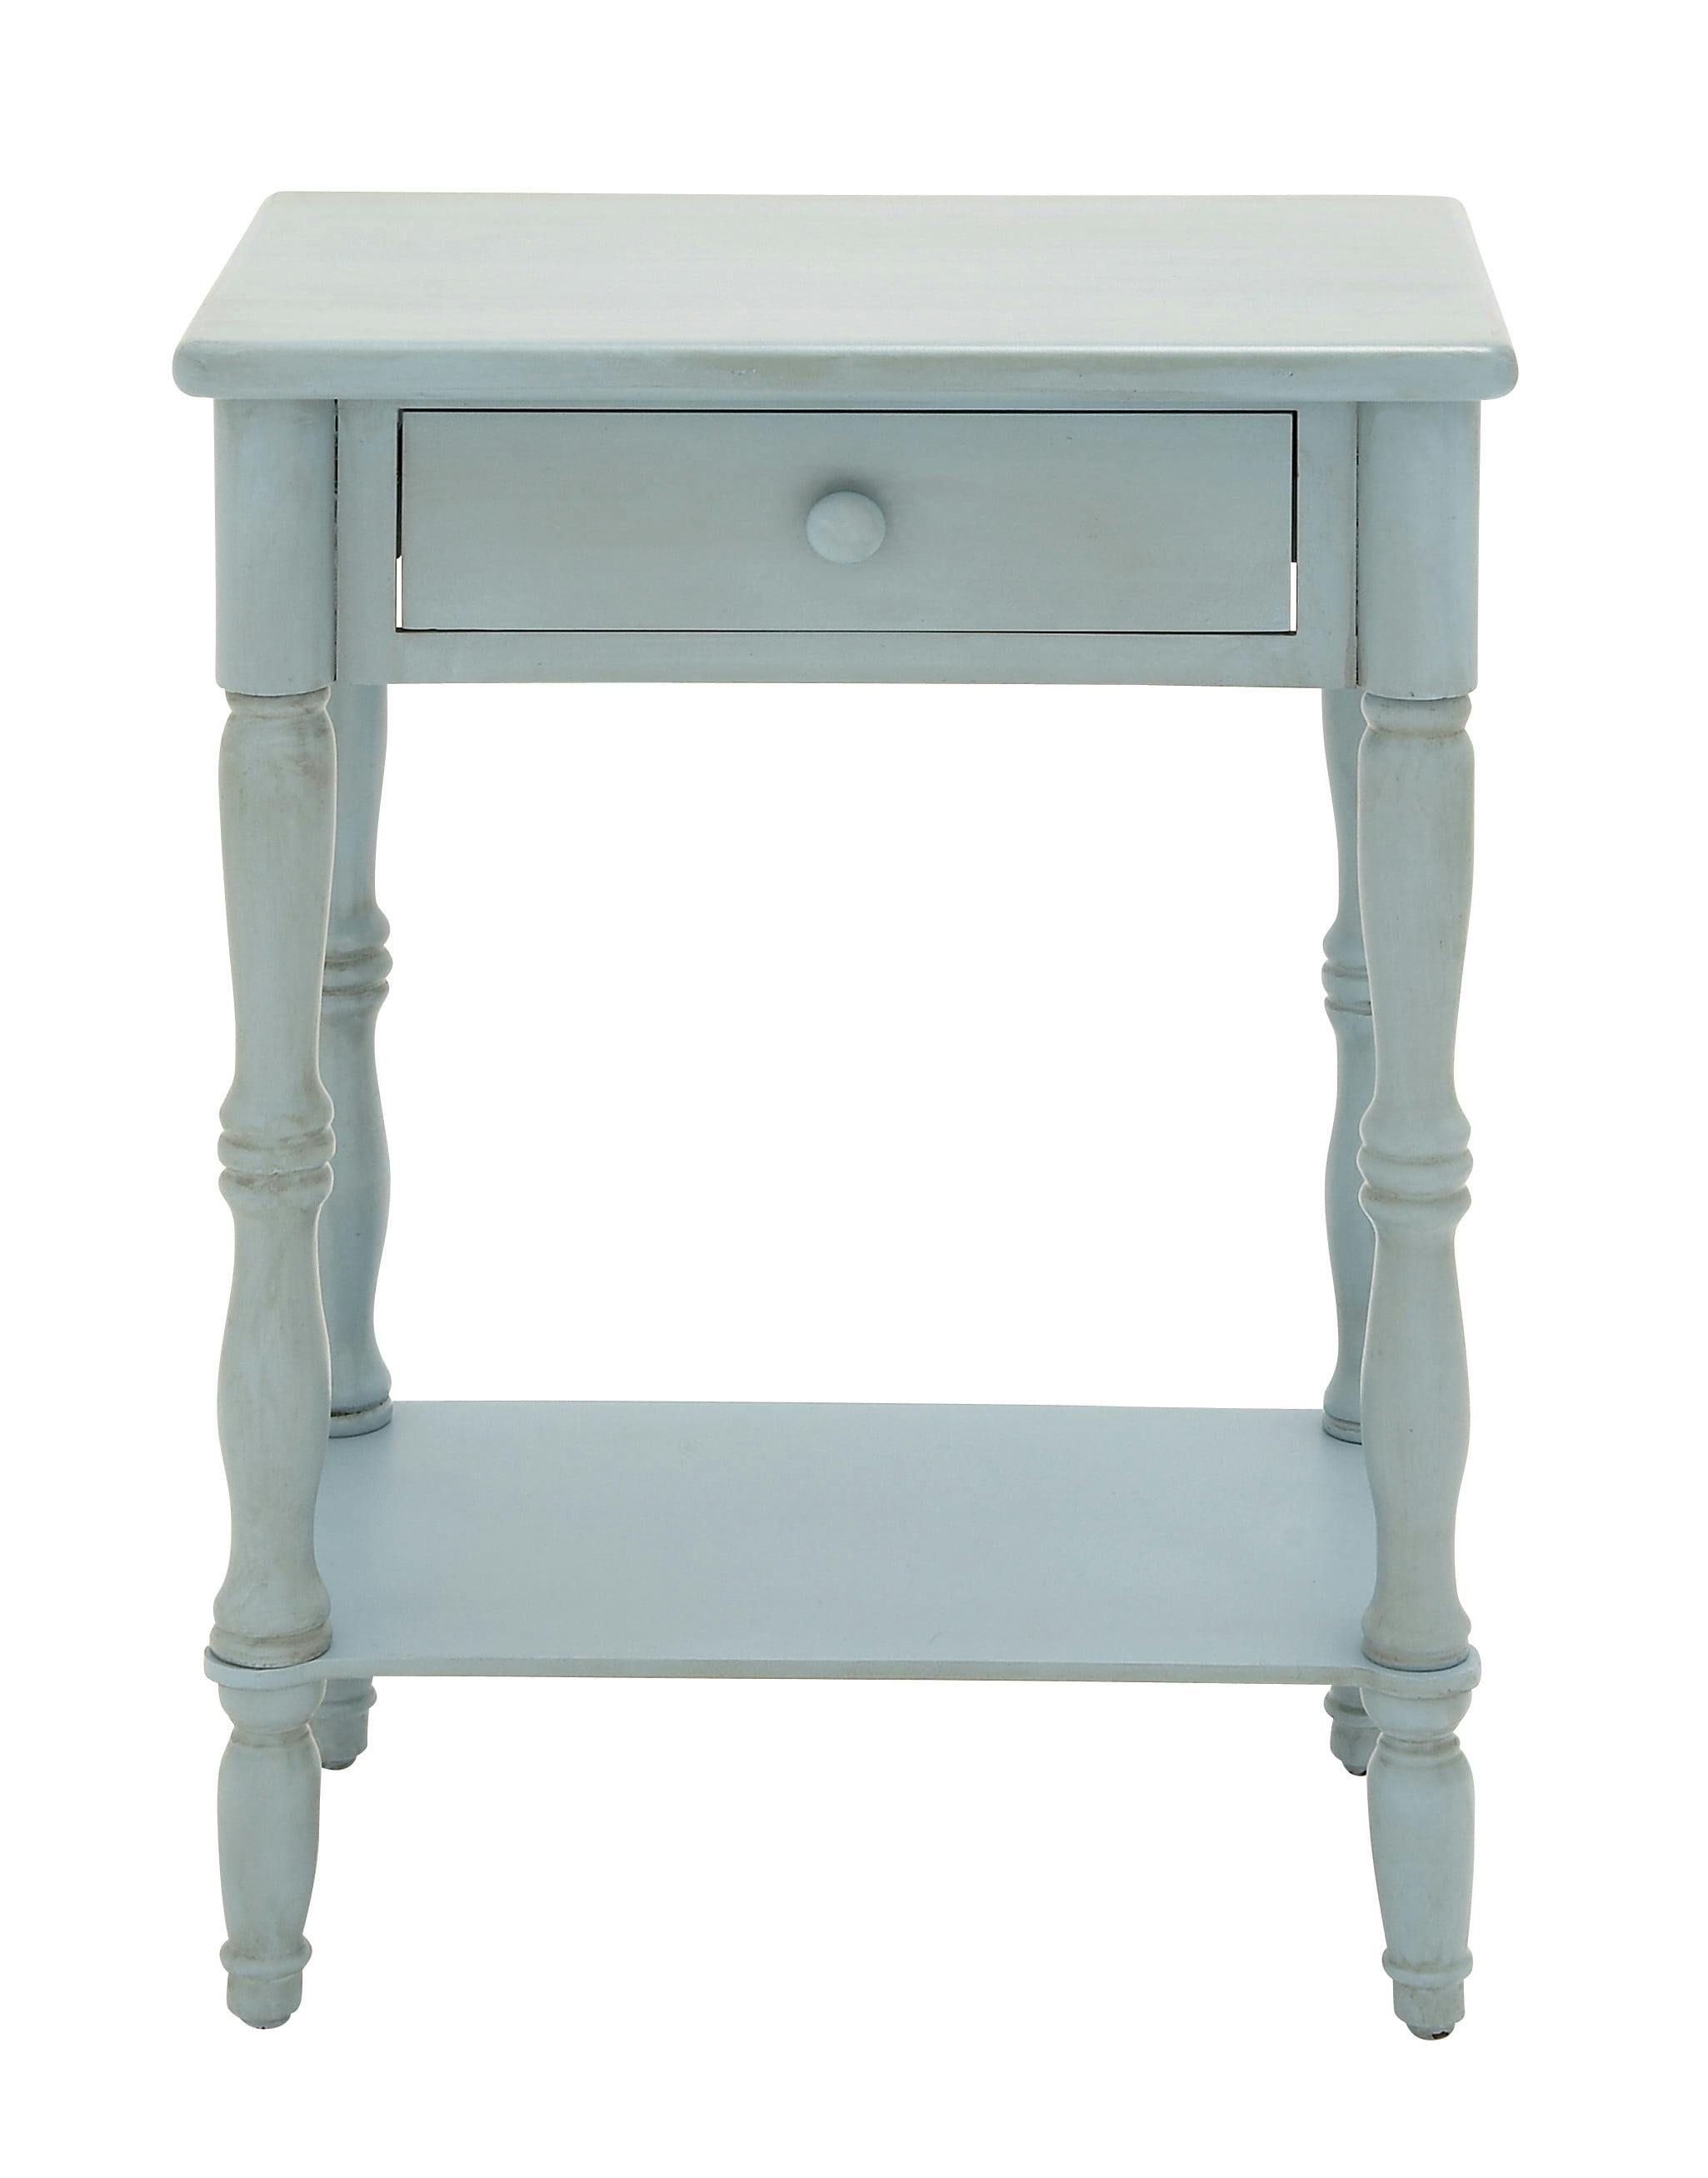 Aqua Blue Weathered Wood Accent Table with Storage